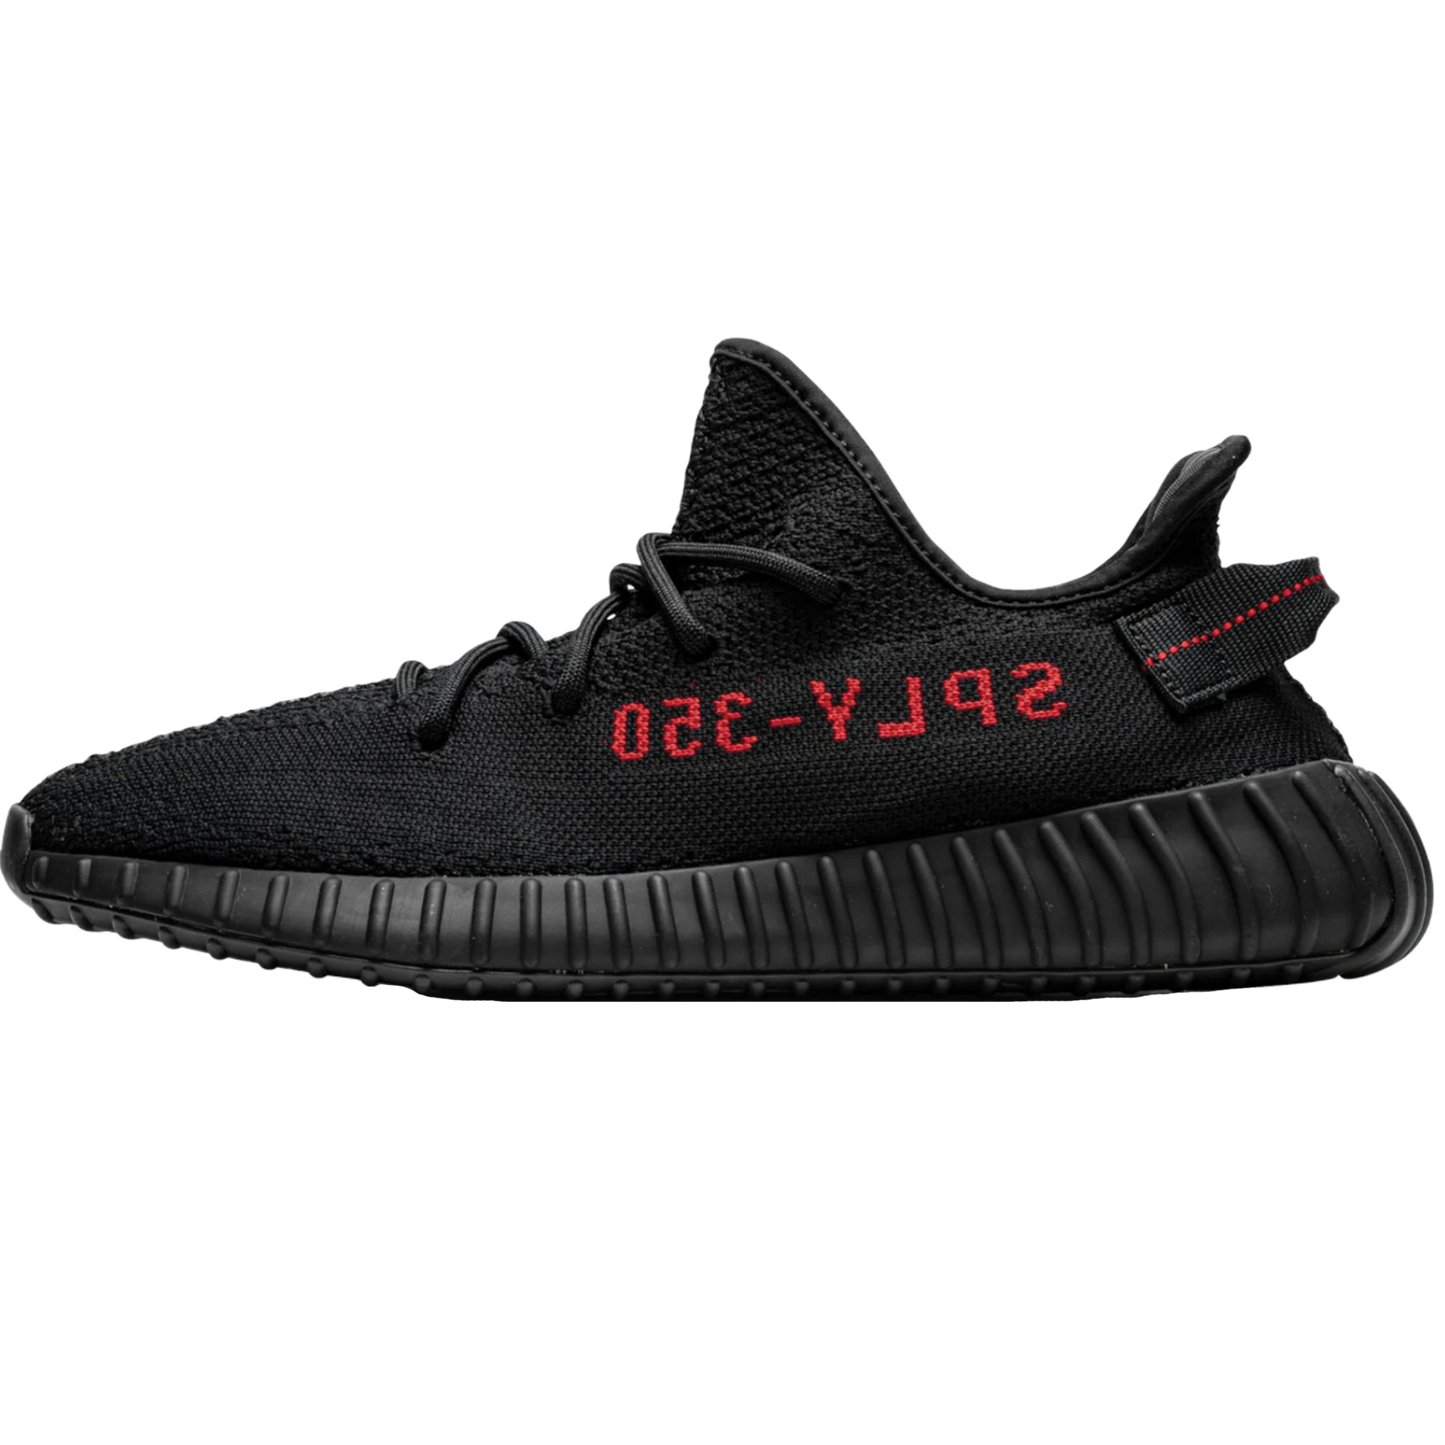 Yeezy Boost 350 Bred (USED)